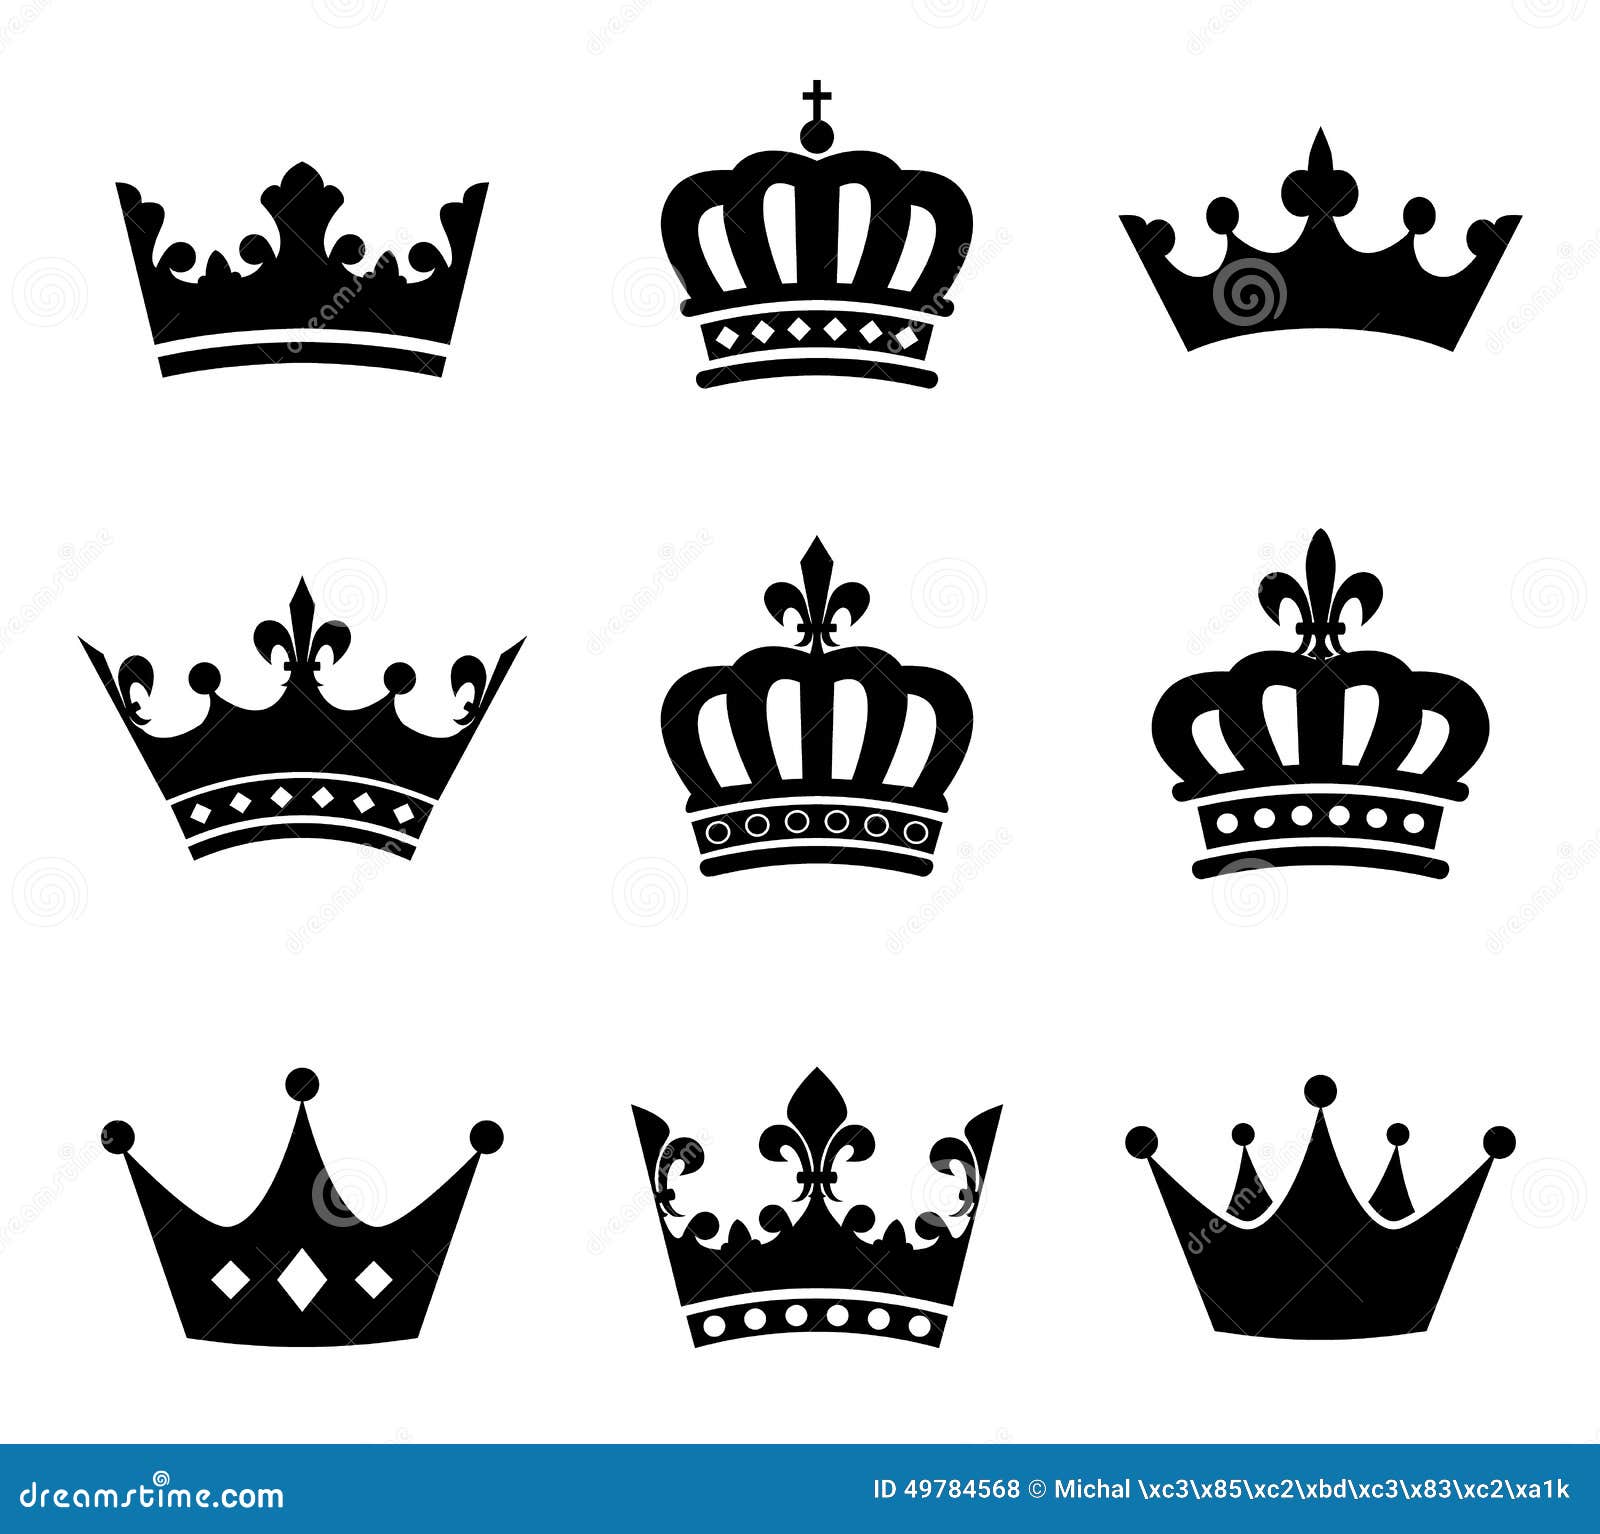 collection of crown silhouette s